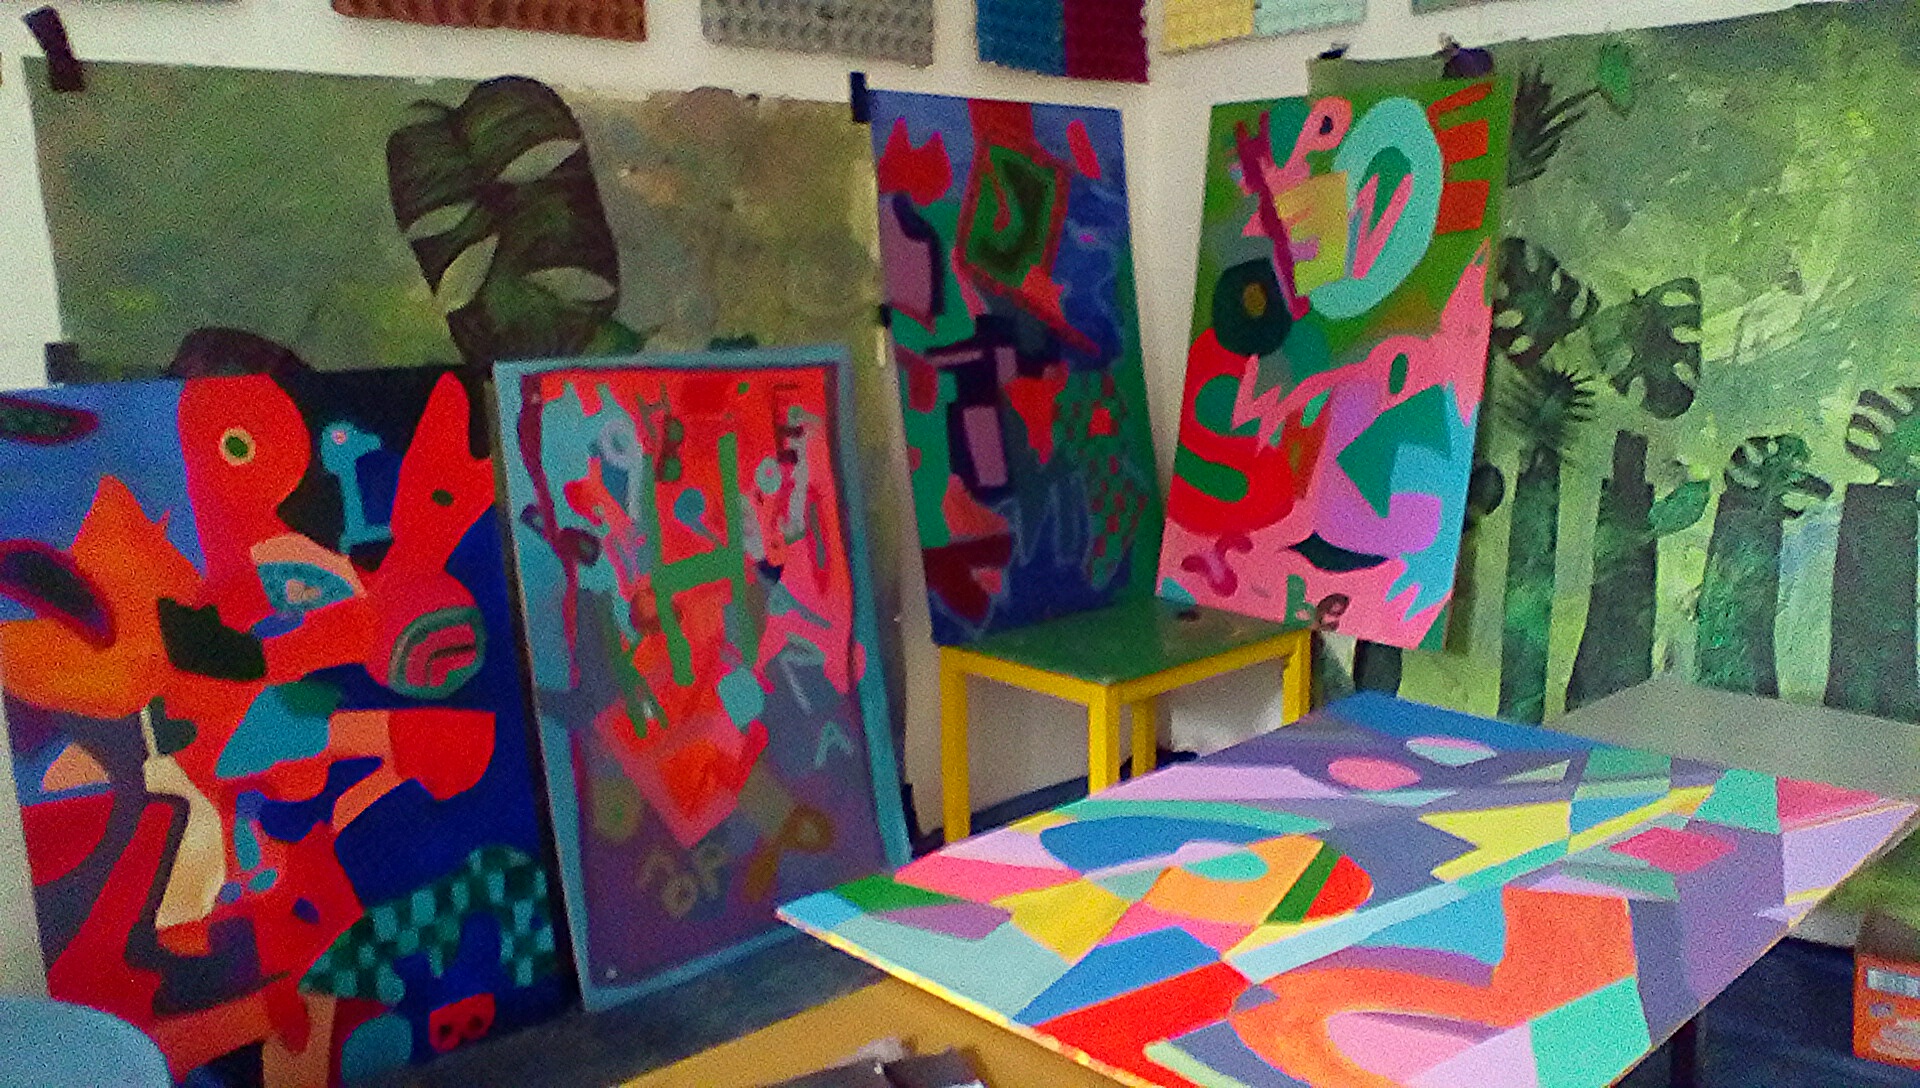 Colourful, large-scale paintings at The Children's Art School Holmfirth